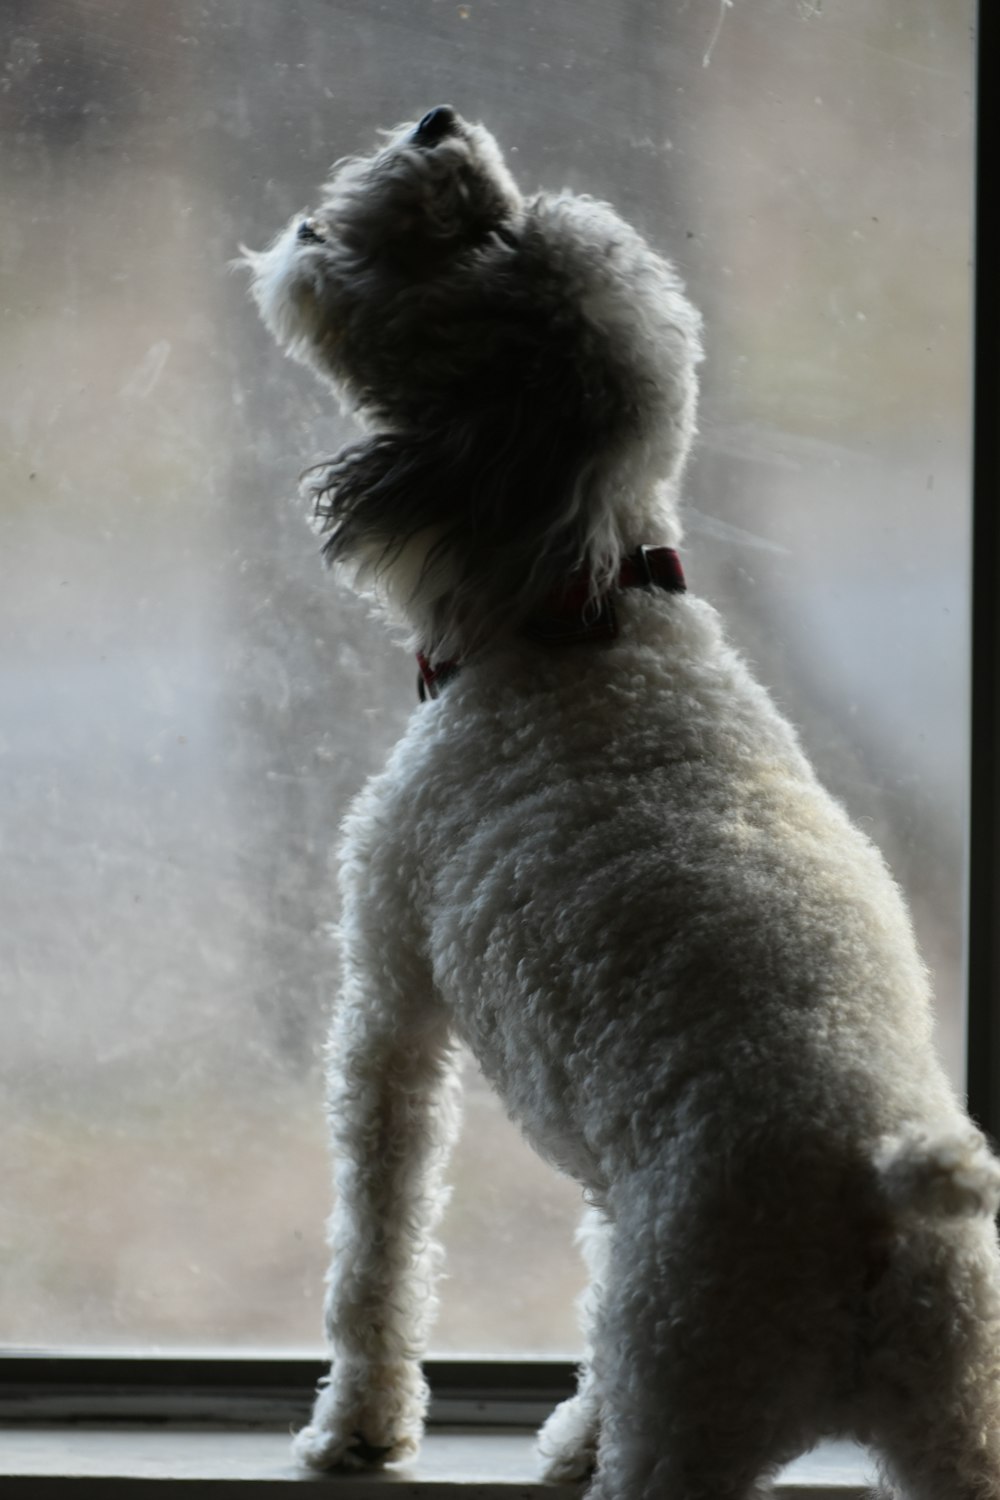 a small white dog standing on its hind legs looking out a window